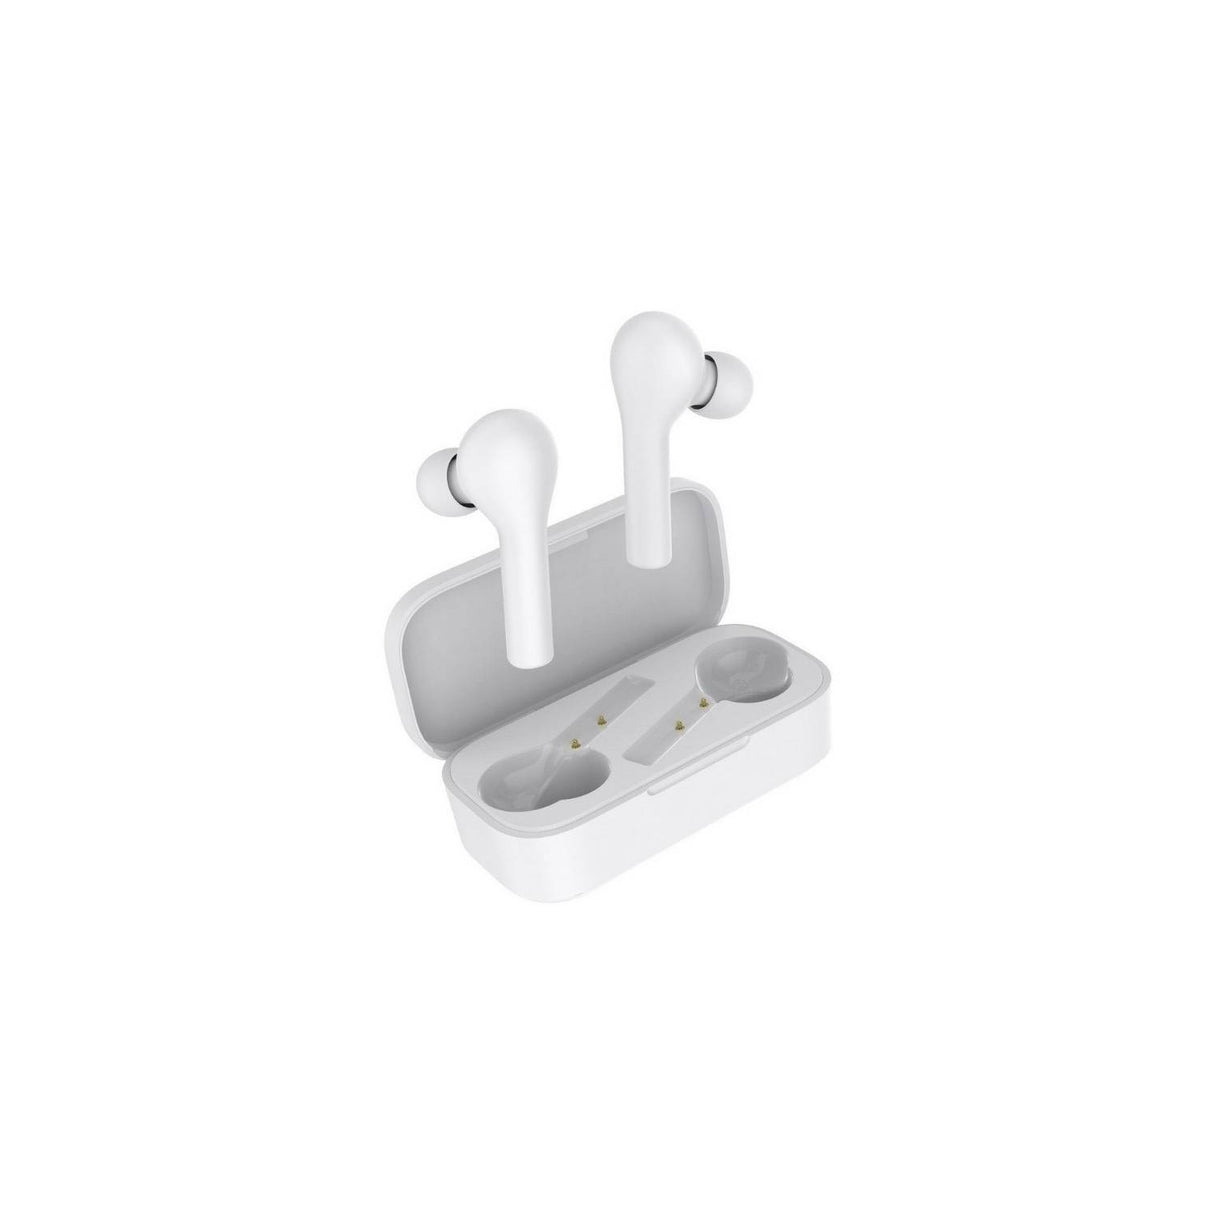 Audifonos Bluetooth In Ear Recargables T5 blanco  QCY Openbox